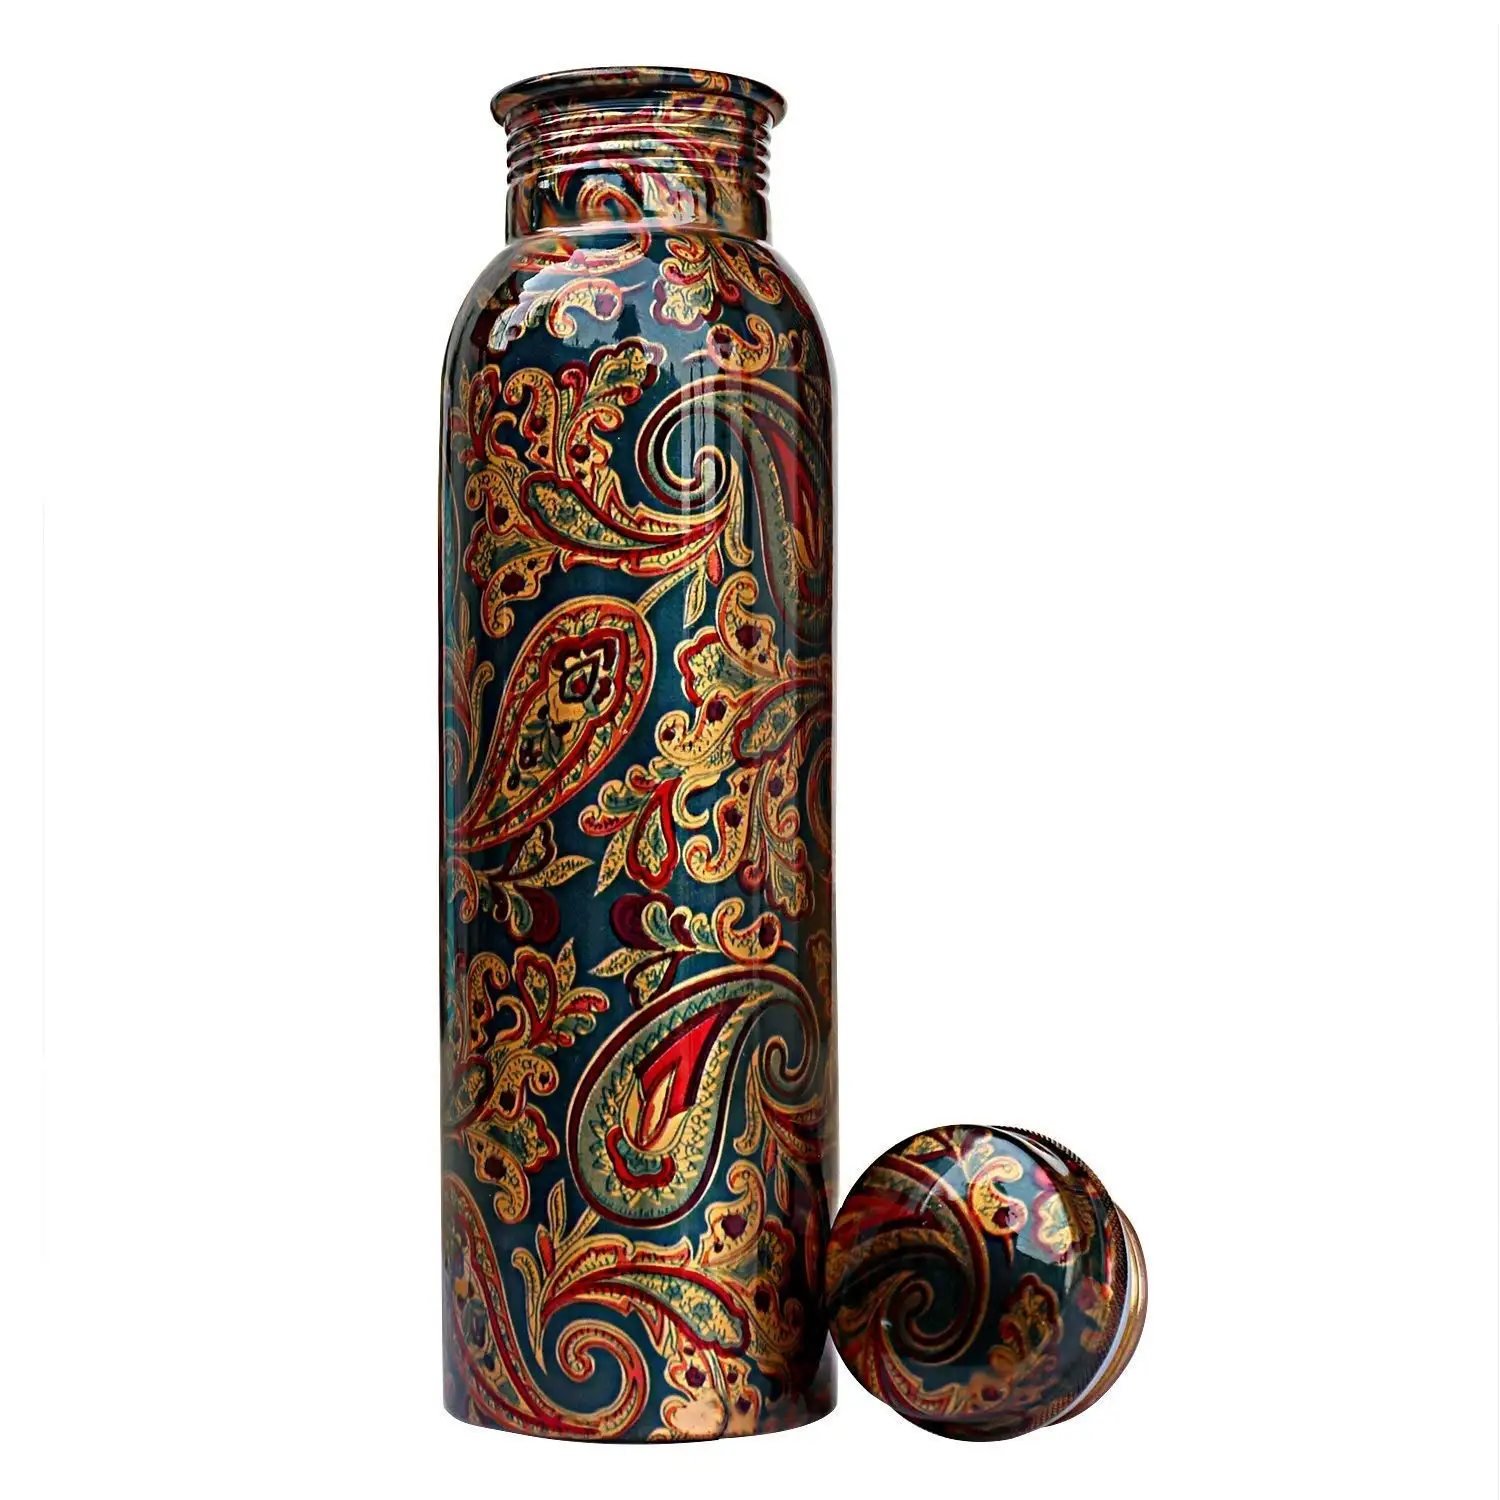 New Arrival Printed Copper Water Bottles Reasonable Price Pure Copper Painted Water Bottles